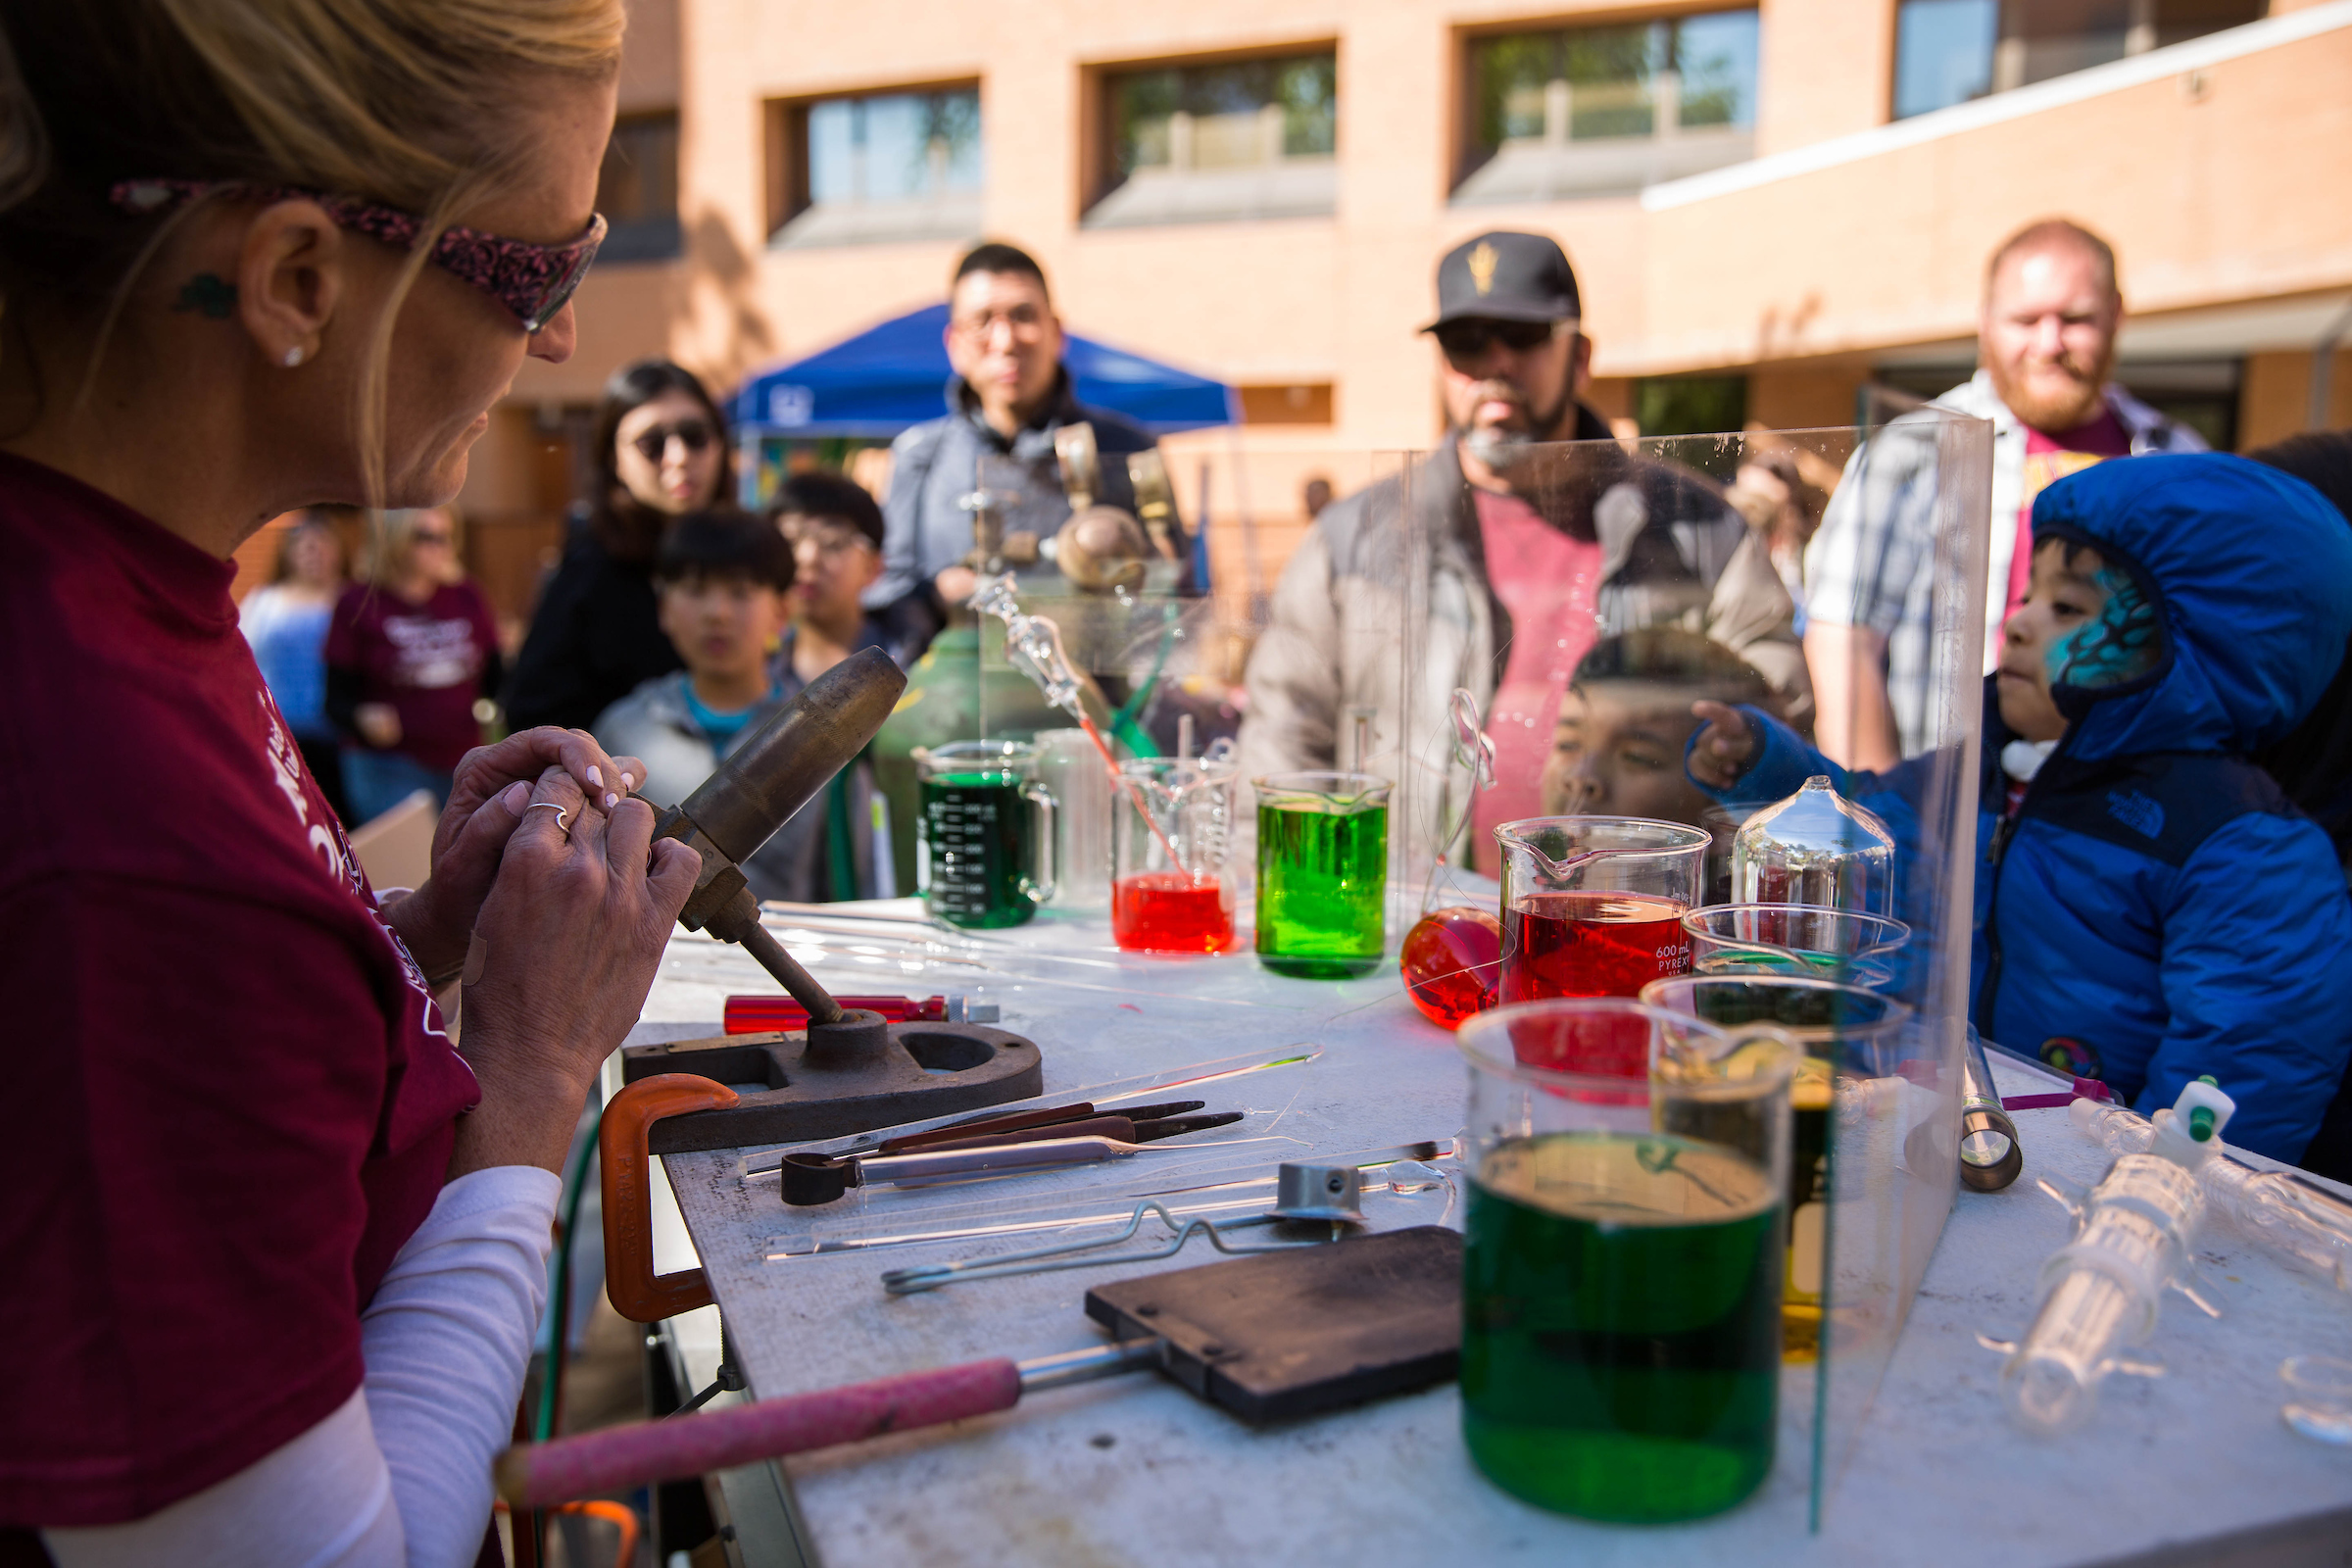 Glassblowing facility manager Christine Roeger demonstrates how glass can be molded with heat and cooling at the Tempe campus on Feb. 24, 2018, for ASU Open Door. Photo by Summer Sorg/ASU Now